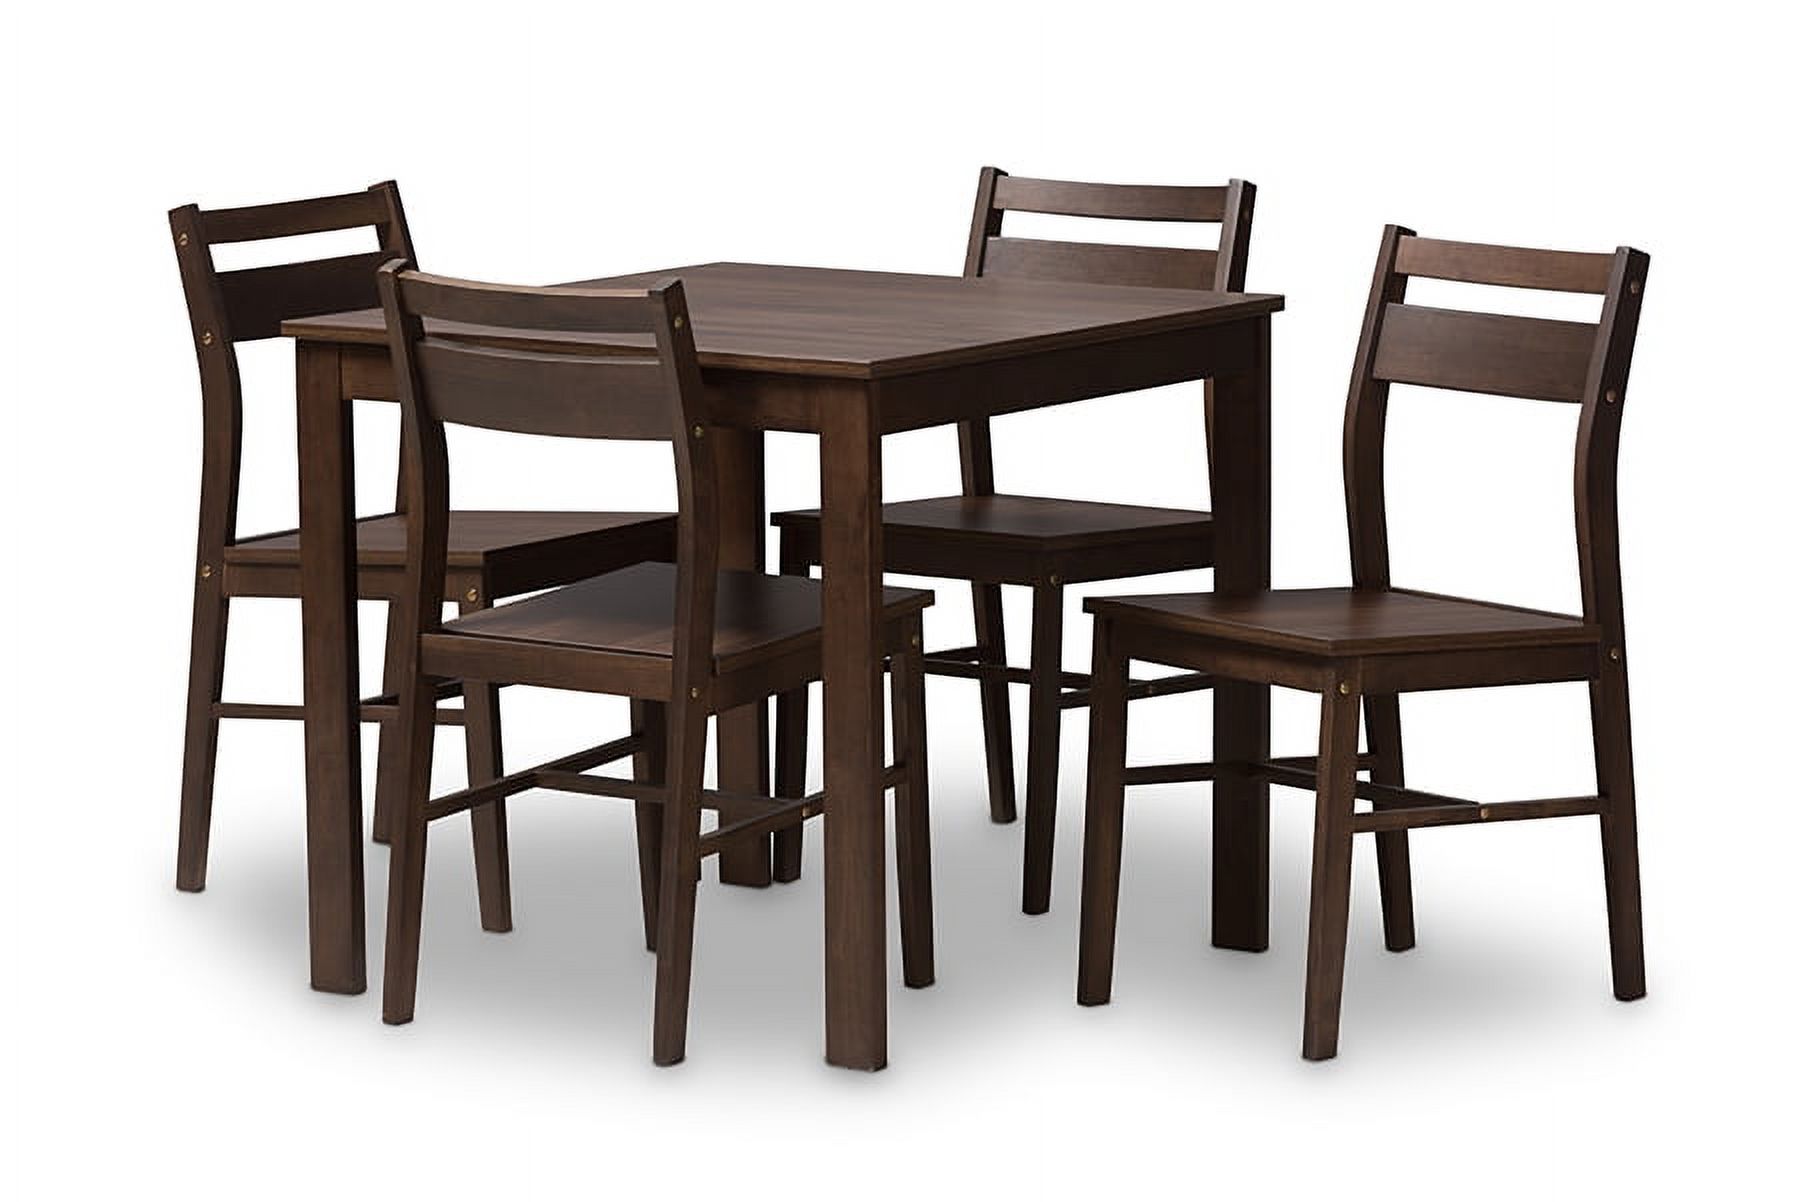 Baxton Studio Lovy Modern and Contemporary Walnut-Finished 5-Piece Dining Set - image 1 of 6